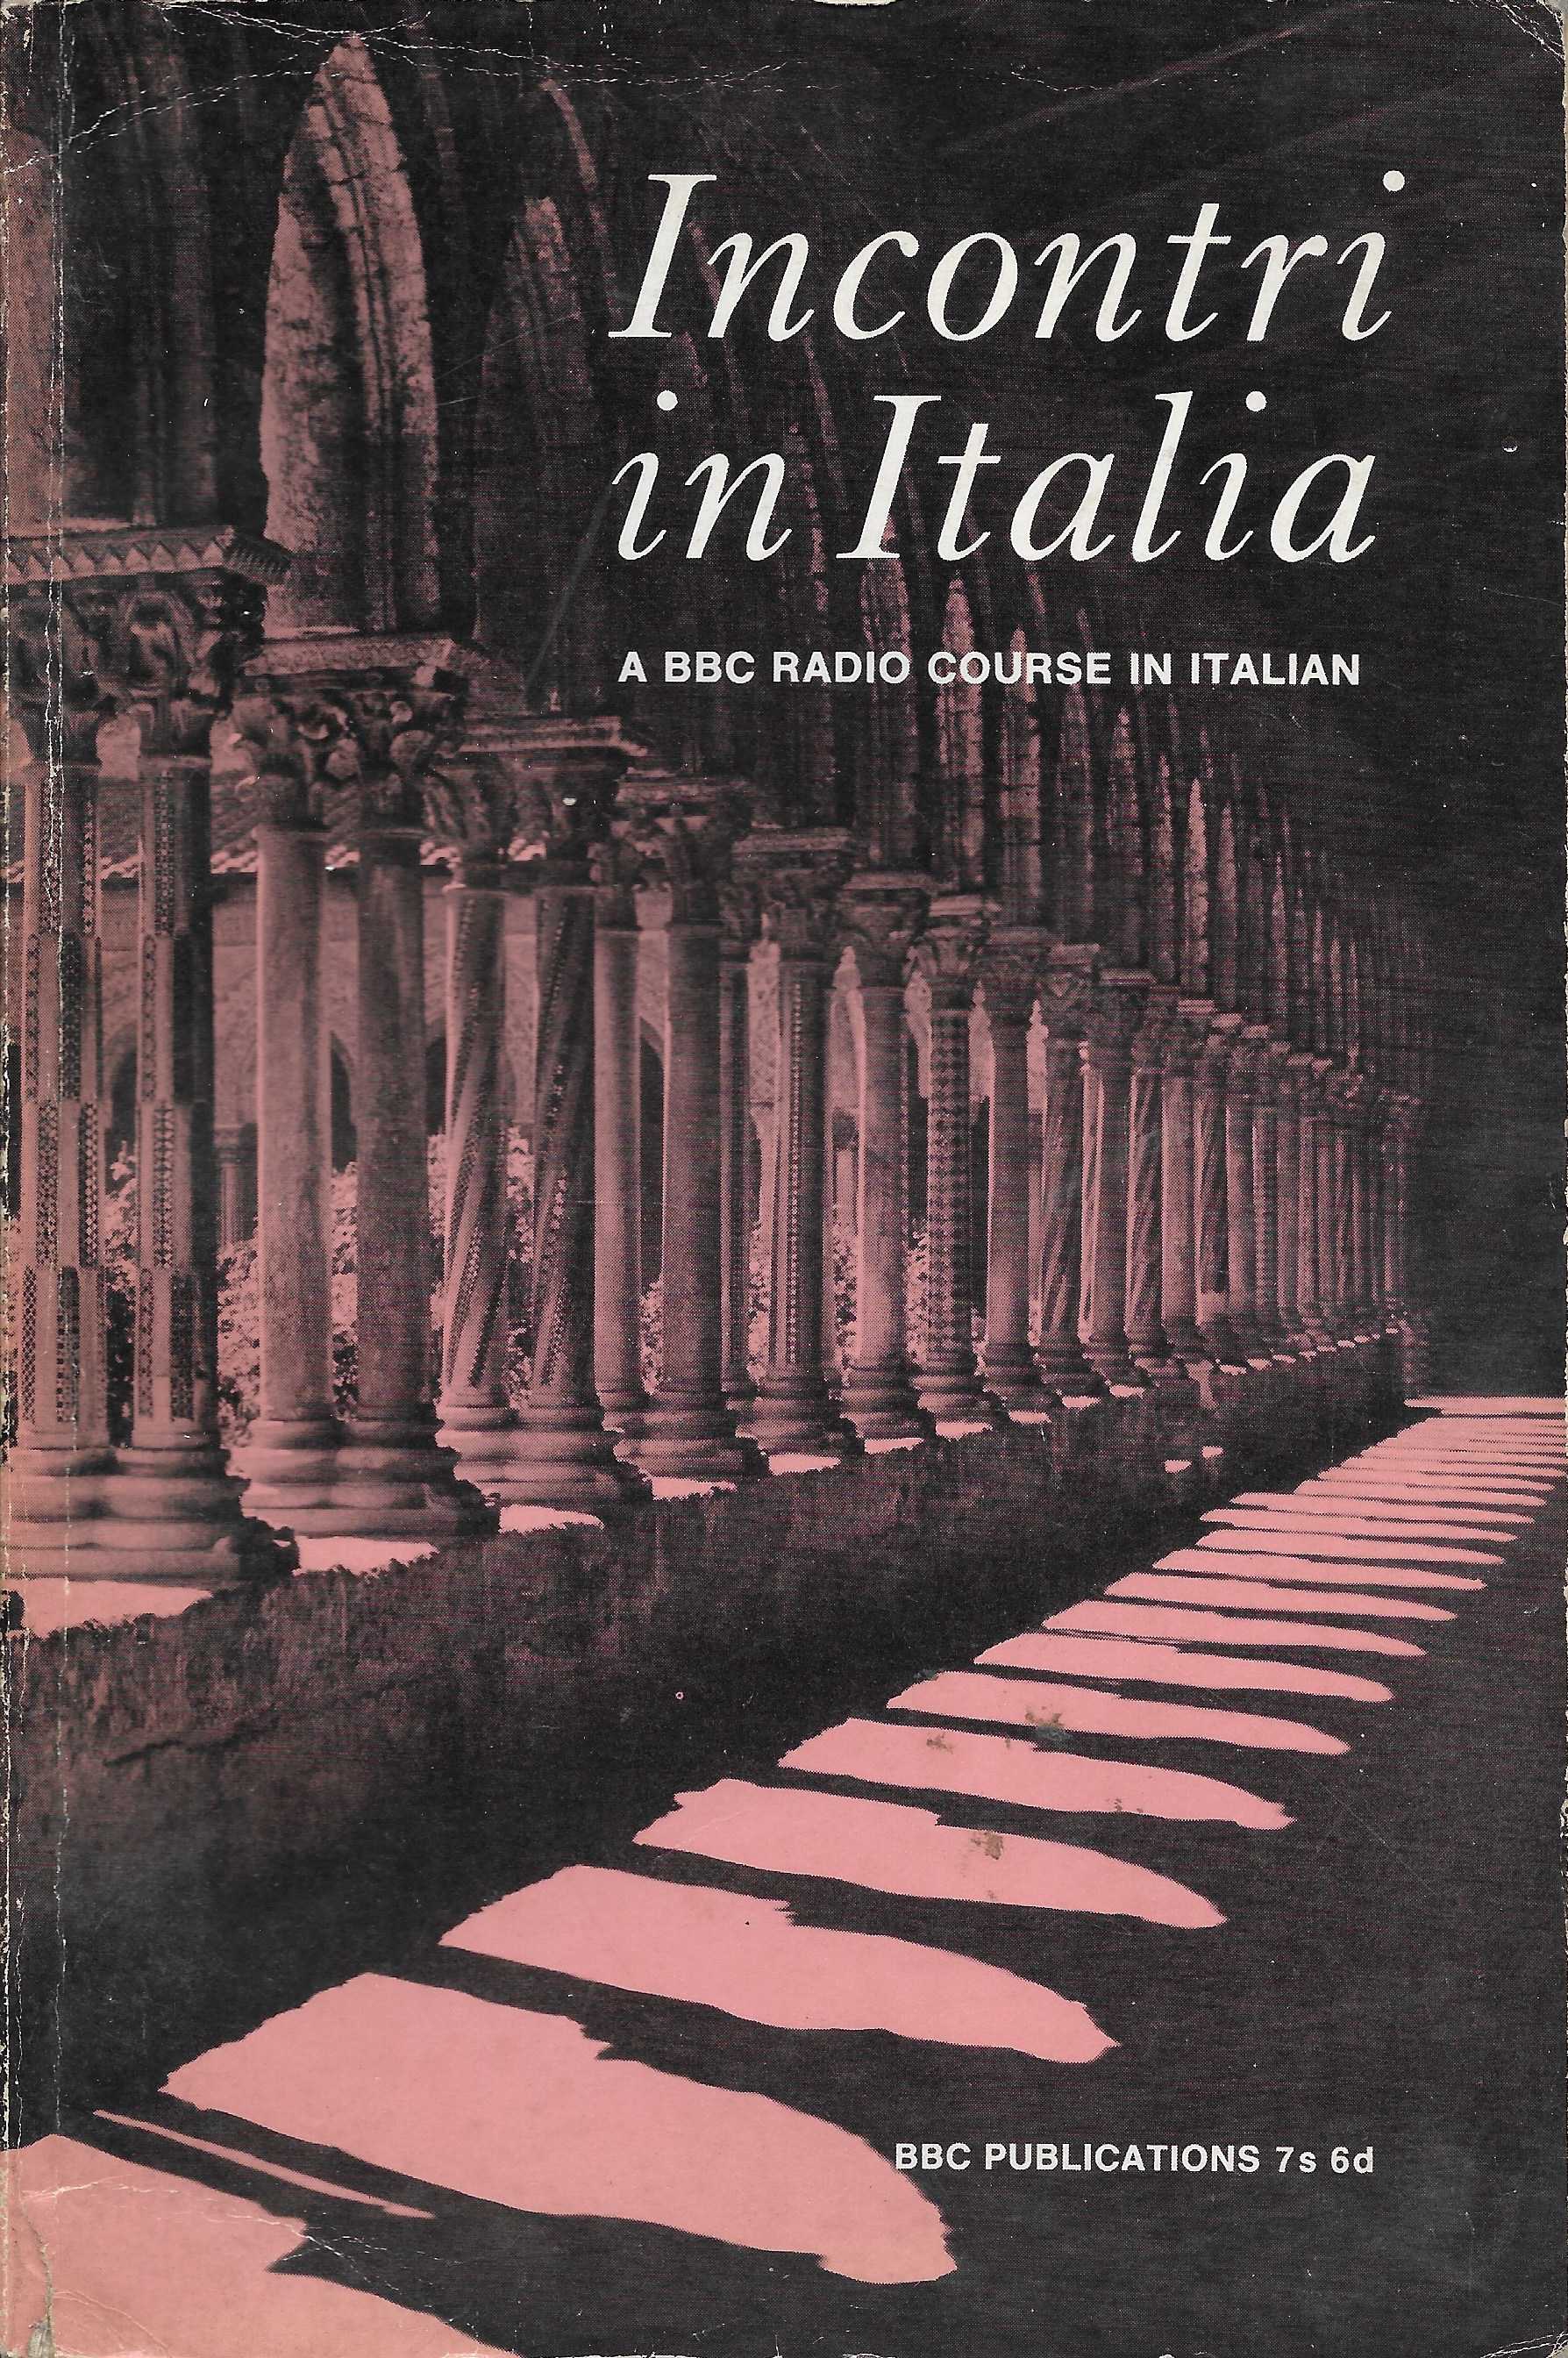 Picture of SBN 0 563 08315 8 Incontri in Italia by artist Giovanni Carsaniga / Anna-Laura Lepschy from the BBC books - Records and Tapes library